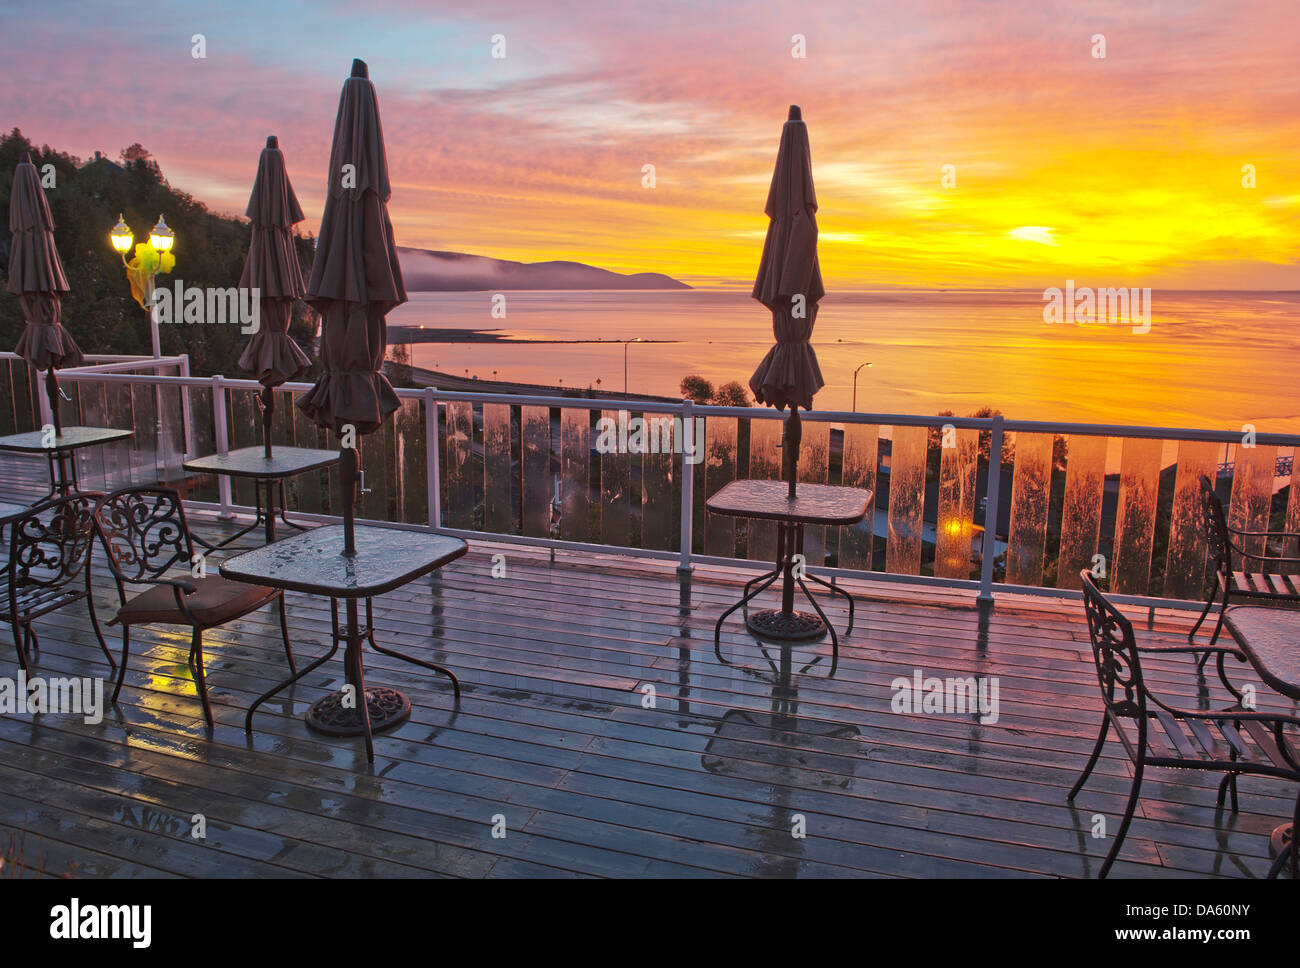 Terrace, Gite Mer et Montagne, St. Lawrence River, river, Malbaie, Quebec, Canada, sunset, tables, chairs Stock Photo